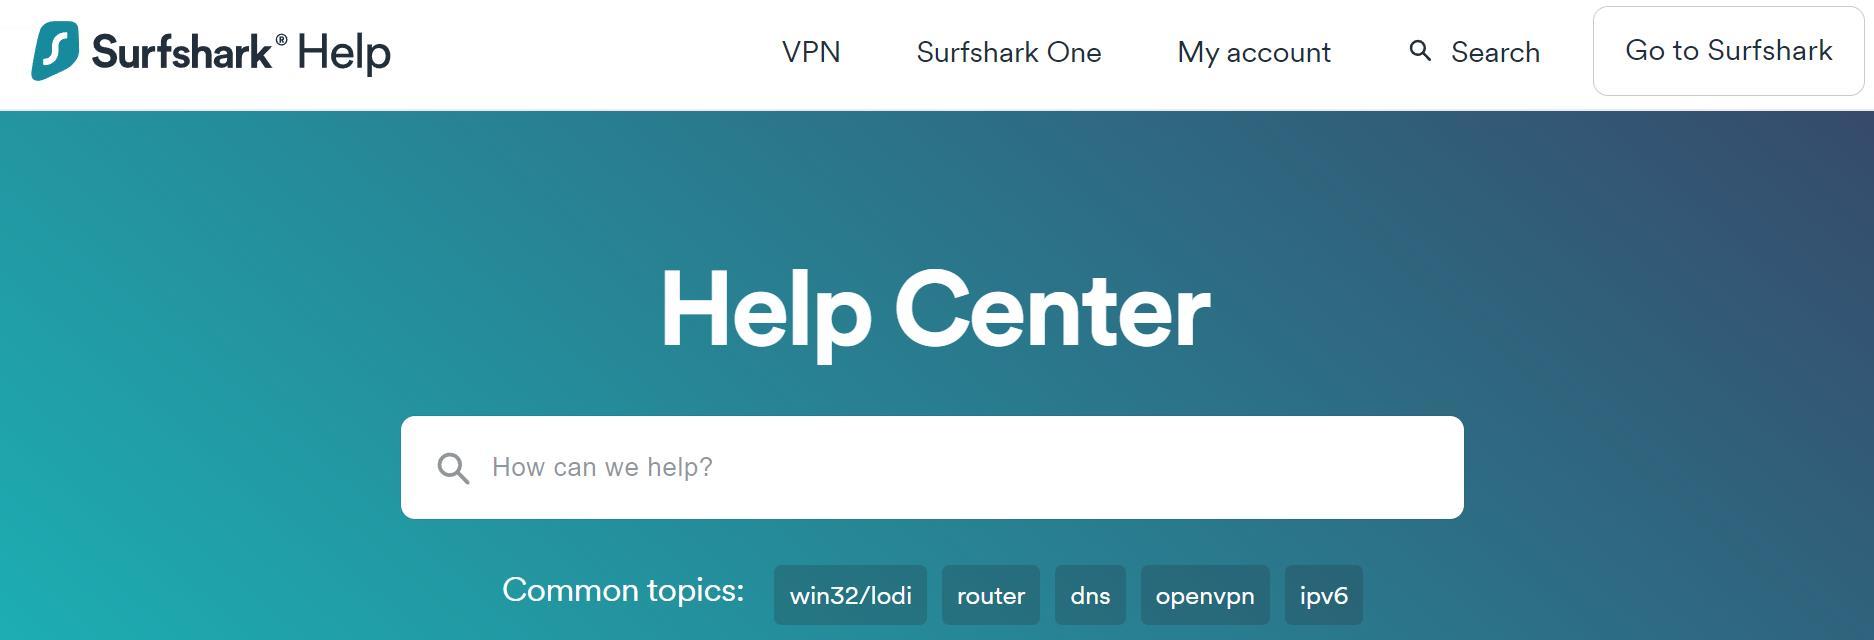 Surfshark's Help Center includes a search function to help narrow down answers to your current issue.